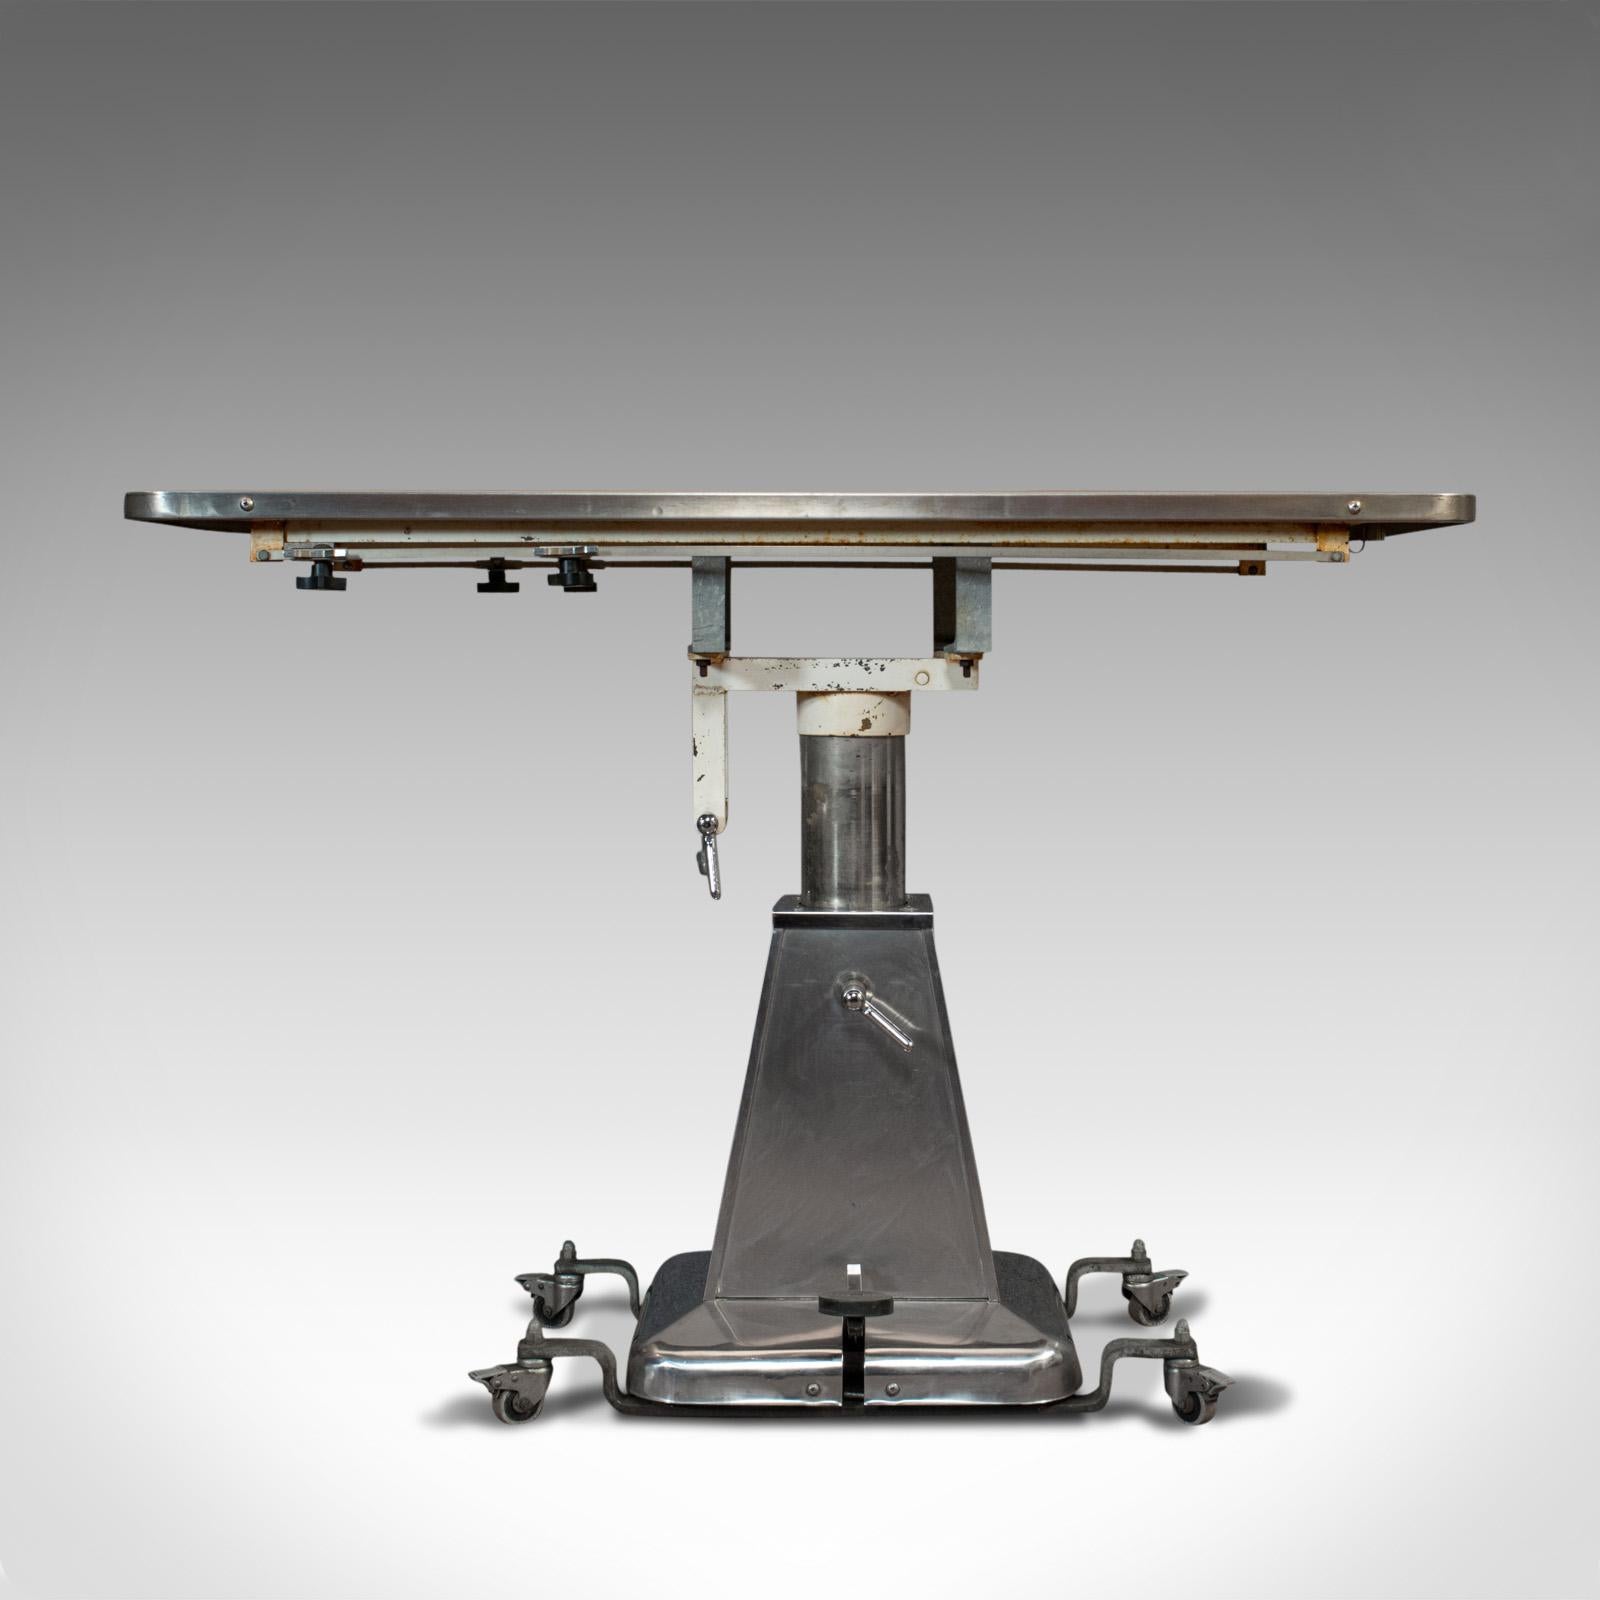 British Vintage Industrial Table, Stainless Steel, Veterinary, Theatre, Shor Line, 1970